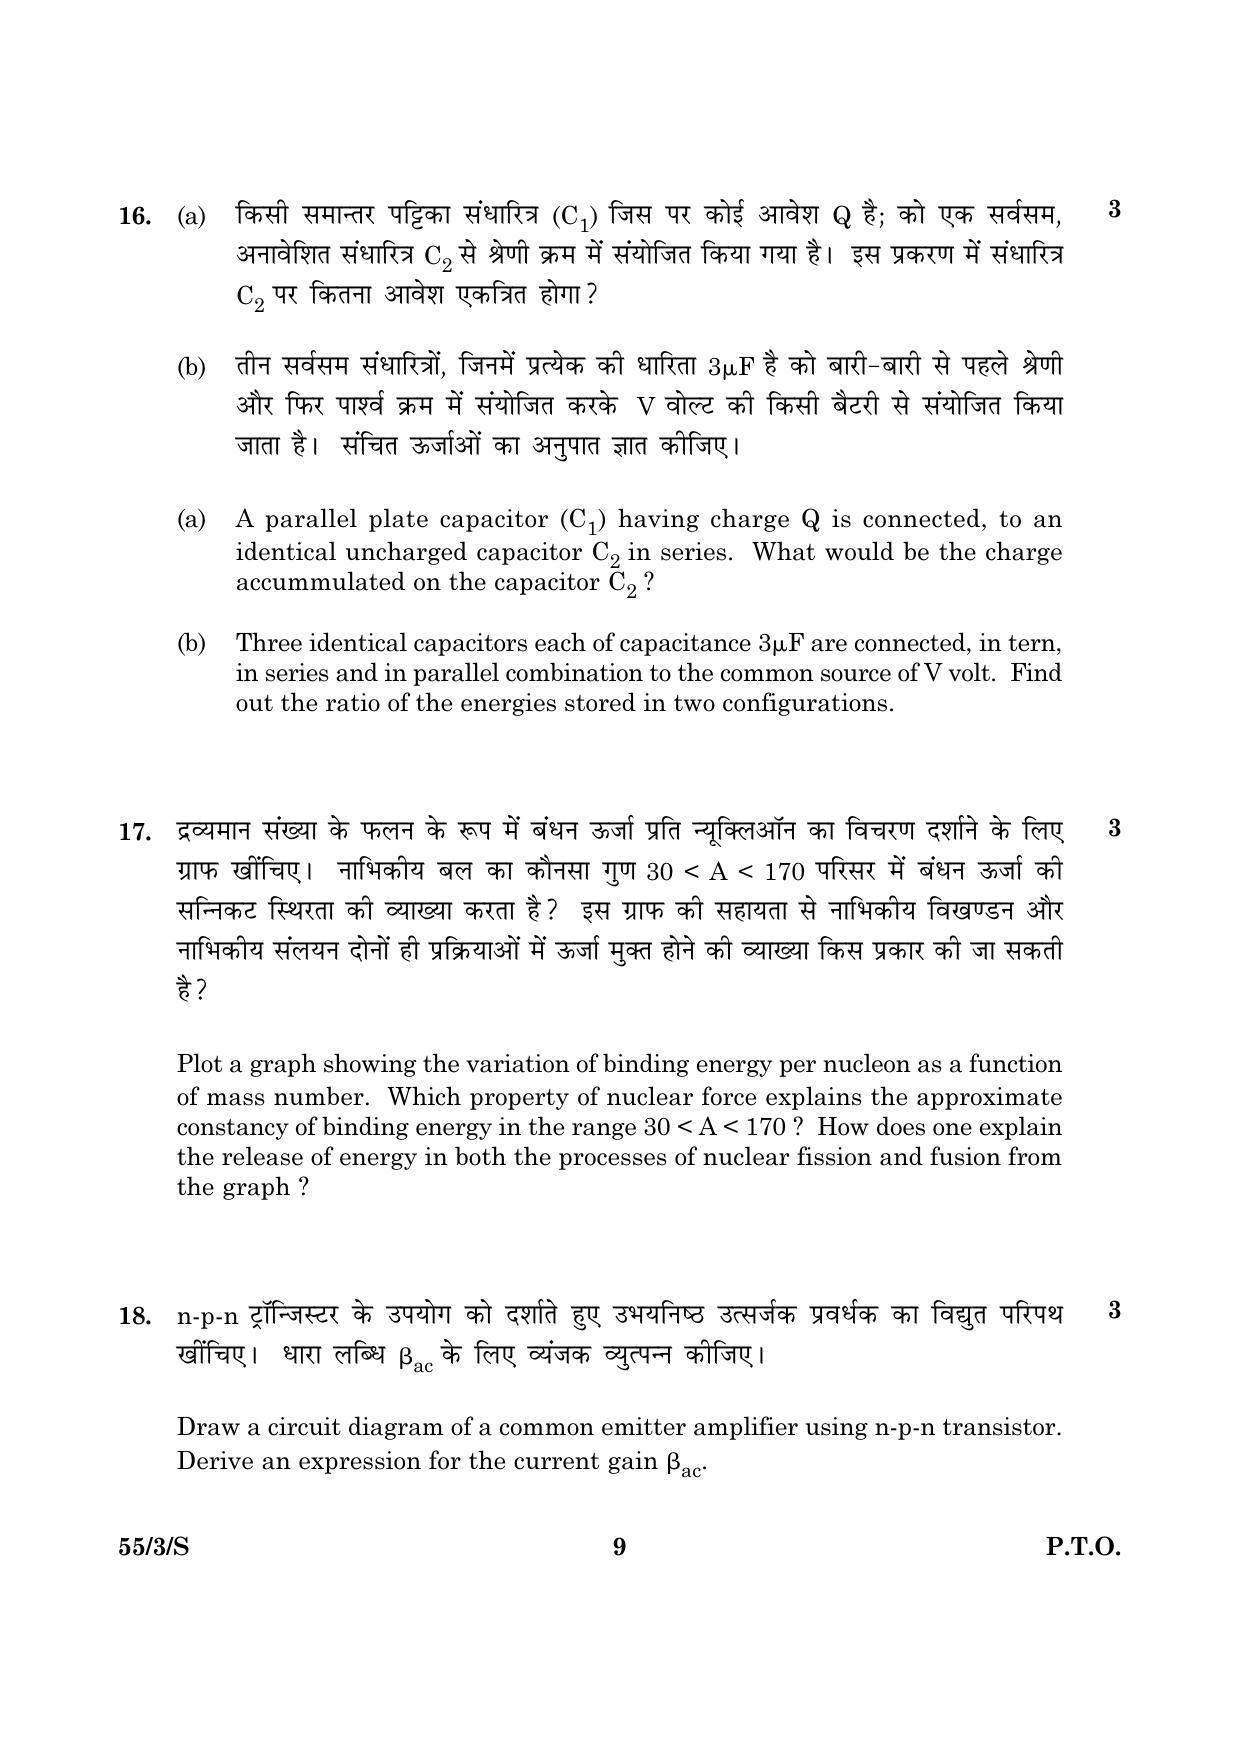 CBSE Class 12 055 Set 3 S Physics Theory 2016 Question Paper - Page 9